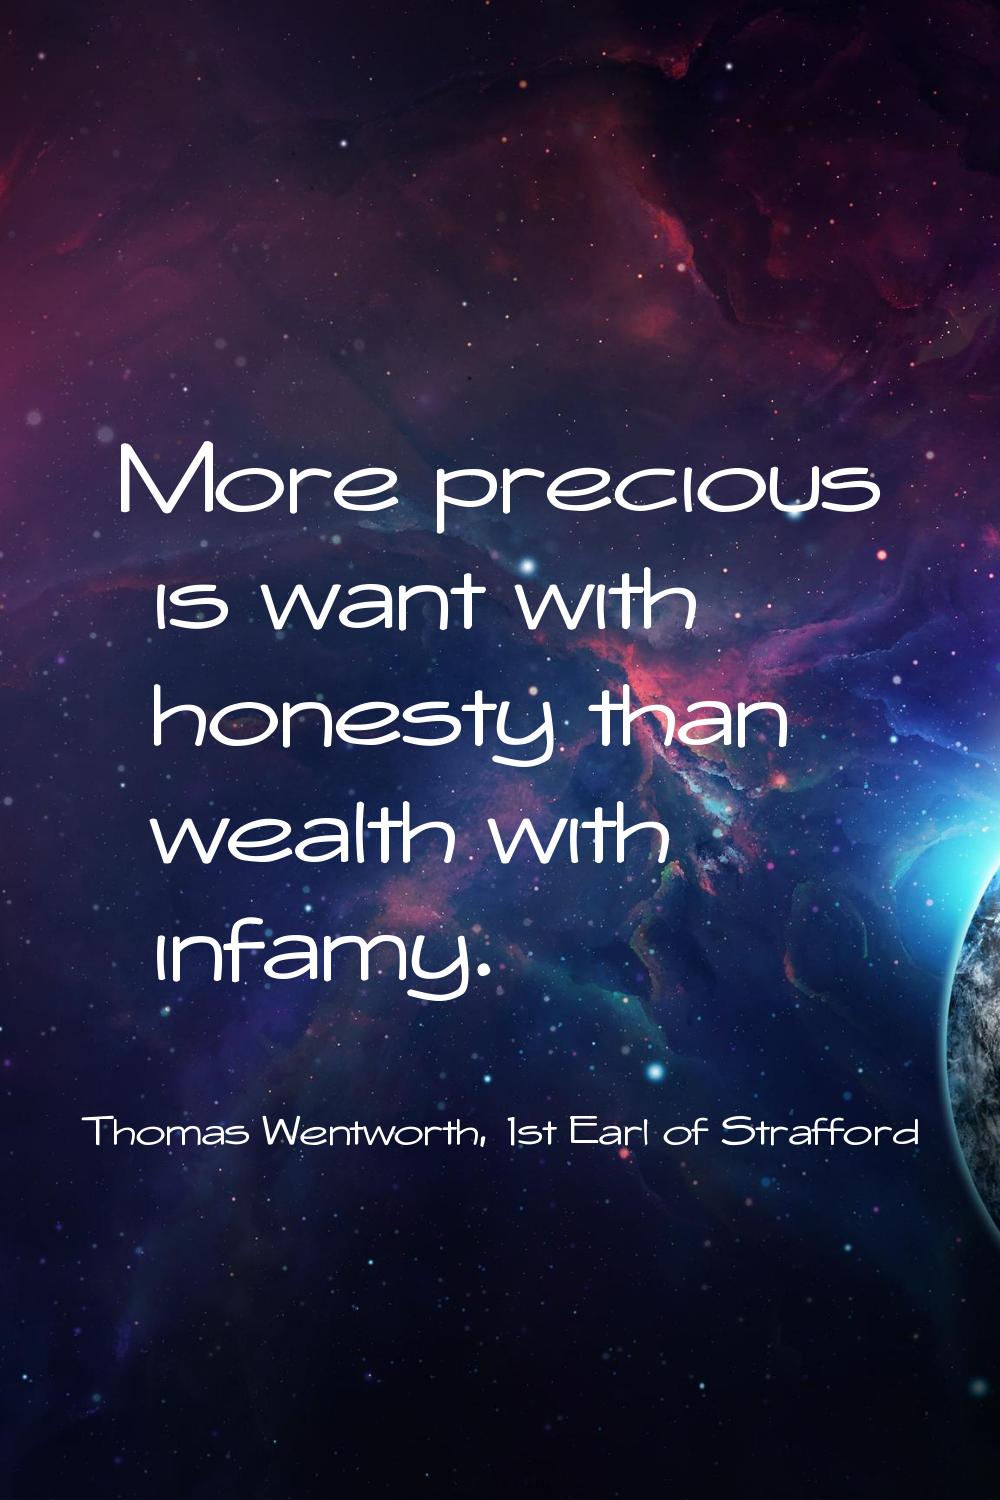 More precious is want with honesty than wealth with infamy.